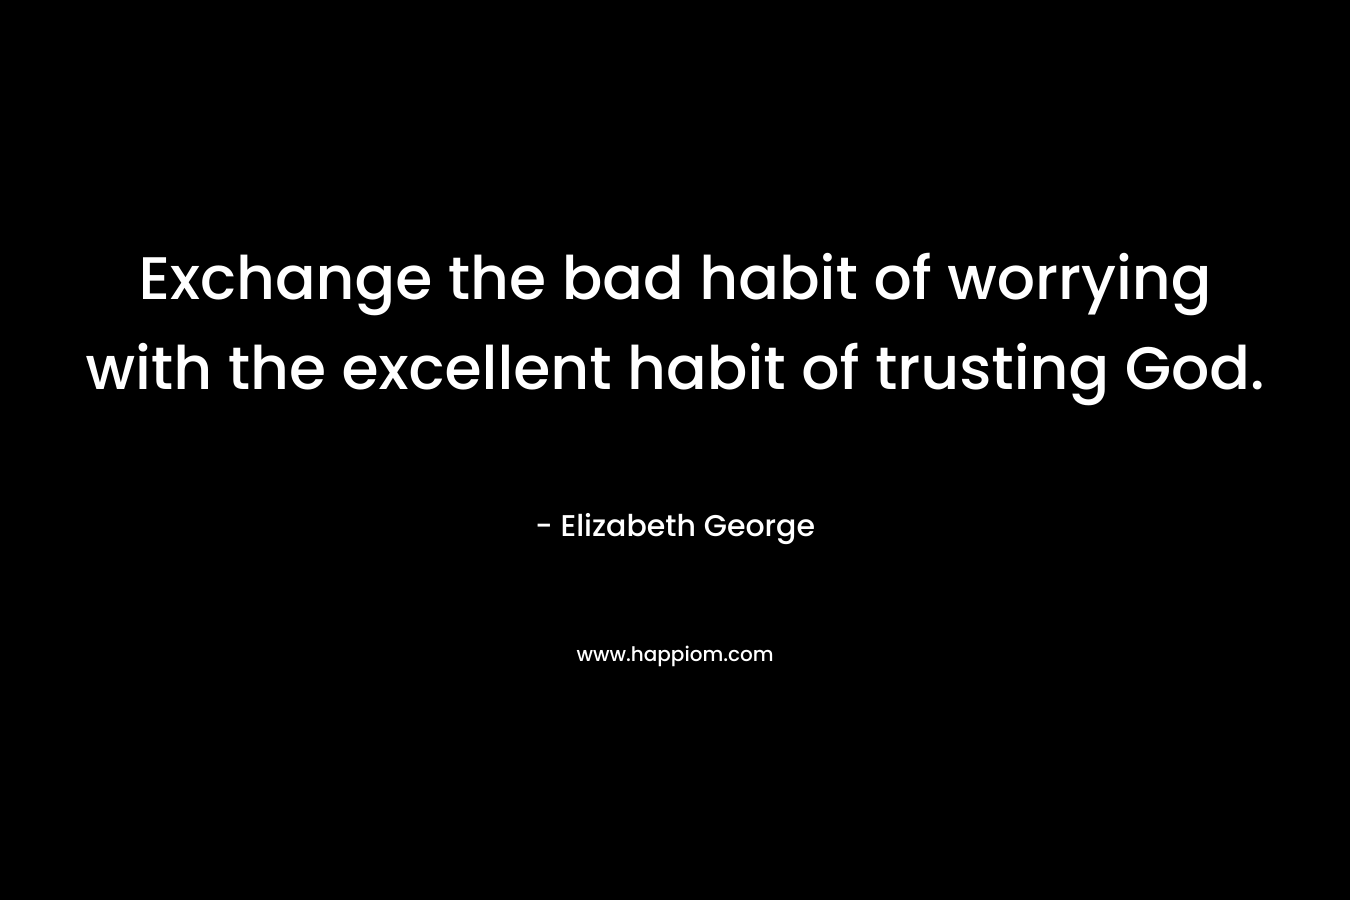 Exchange the bad habit of worrying with the excellent habit of trusting God.